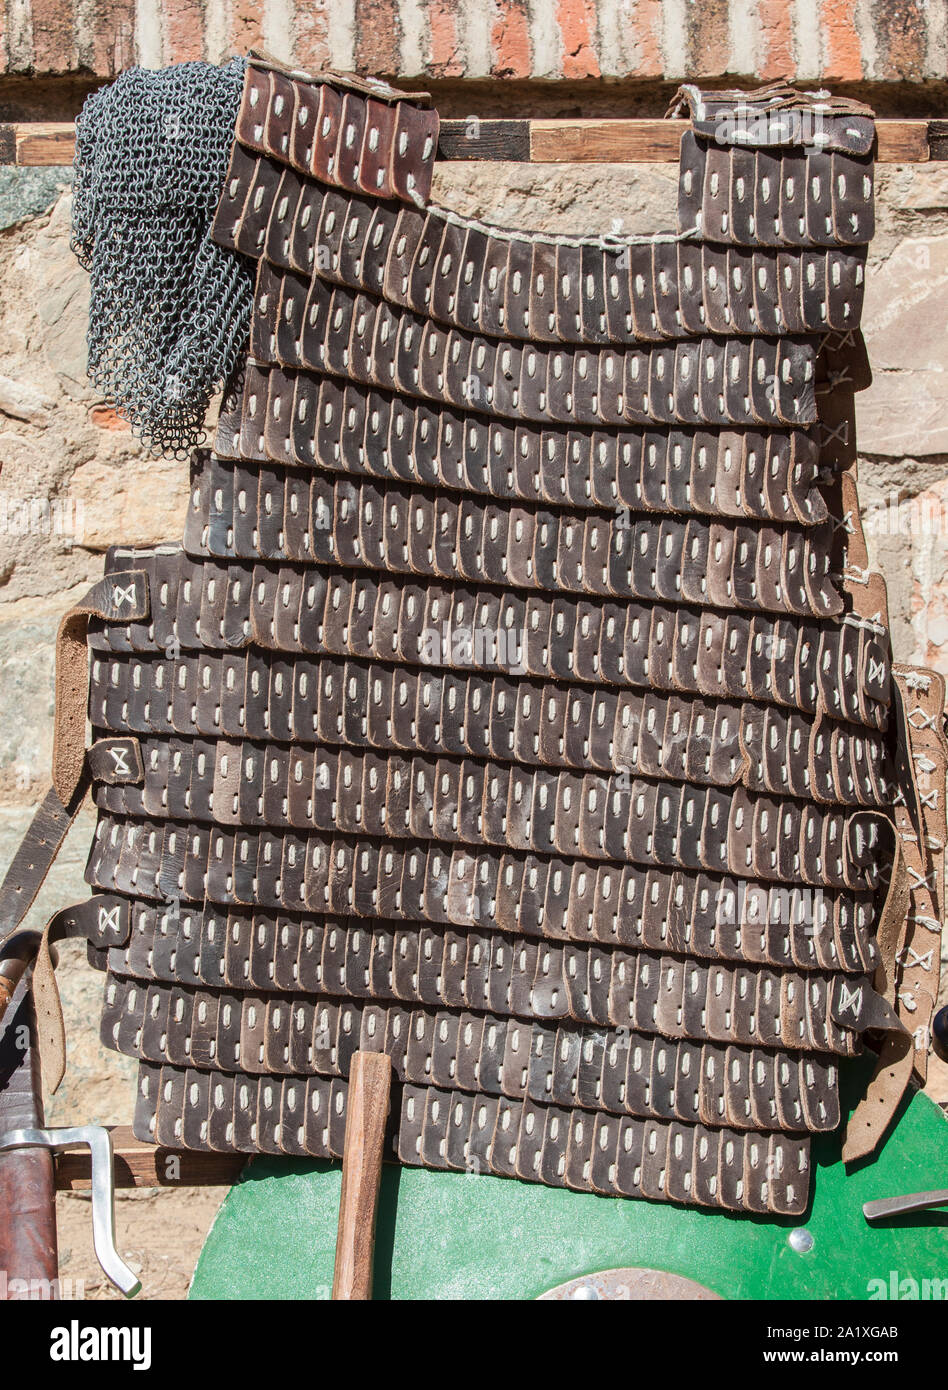 Lamellar armour used by moorish army during Reconquest period. It is made hardened leather of pig Stock Photo